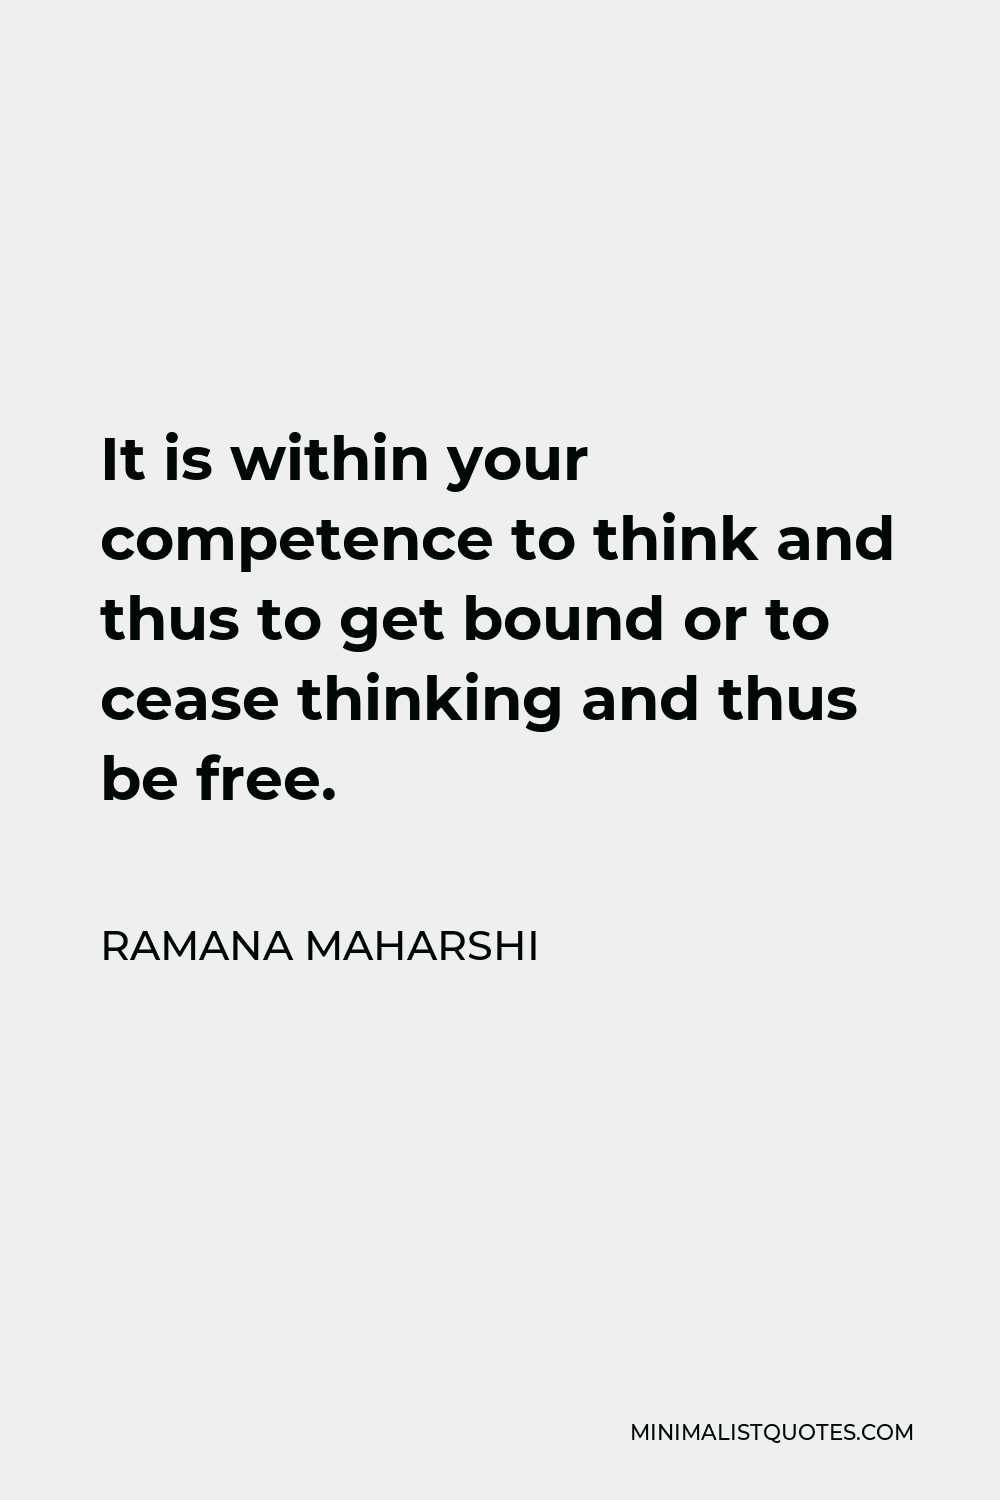 Ramana Maharshi Quote - It is within your competence to think and thus to get bound or to cease thinking and thus be free.